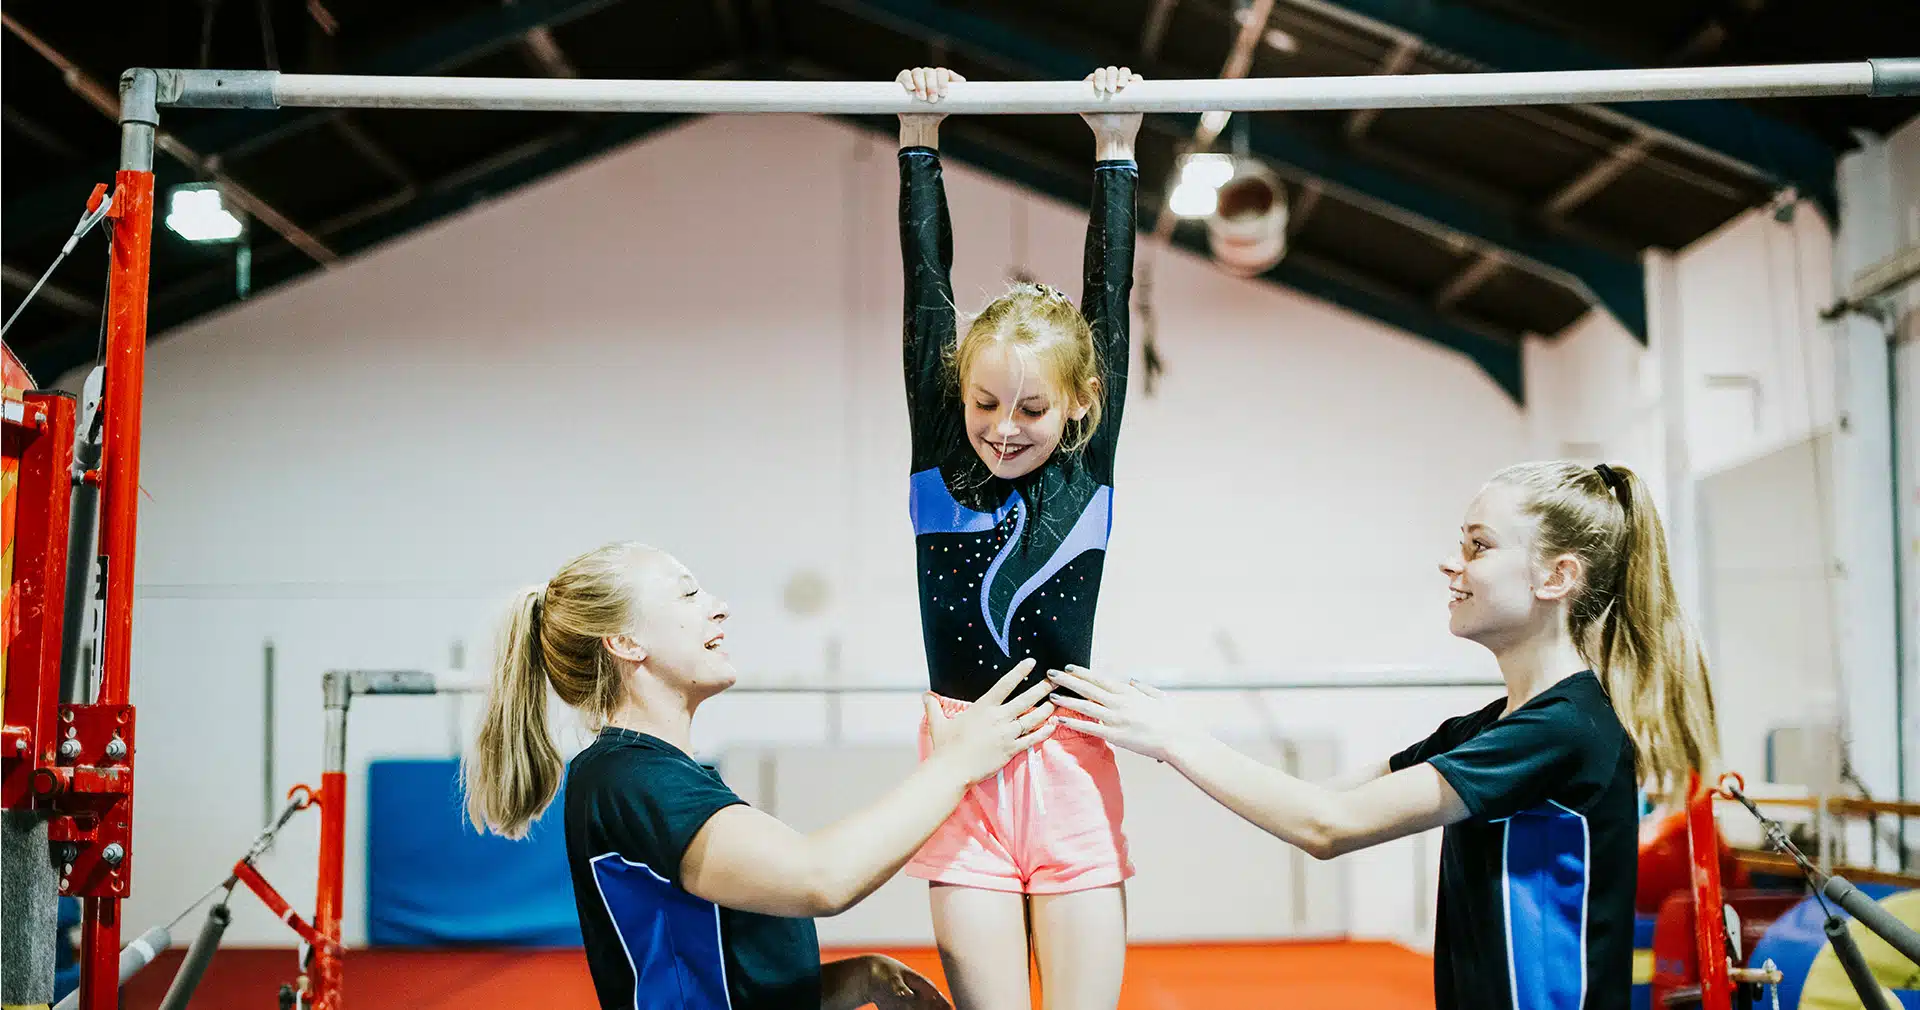 Two women coach a young gymnast